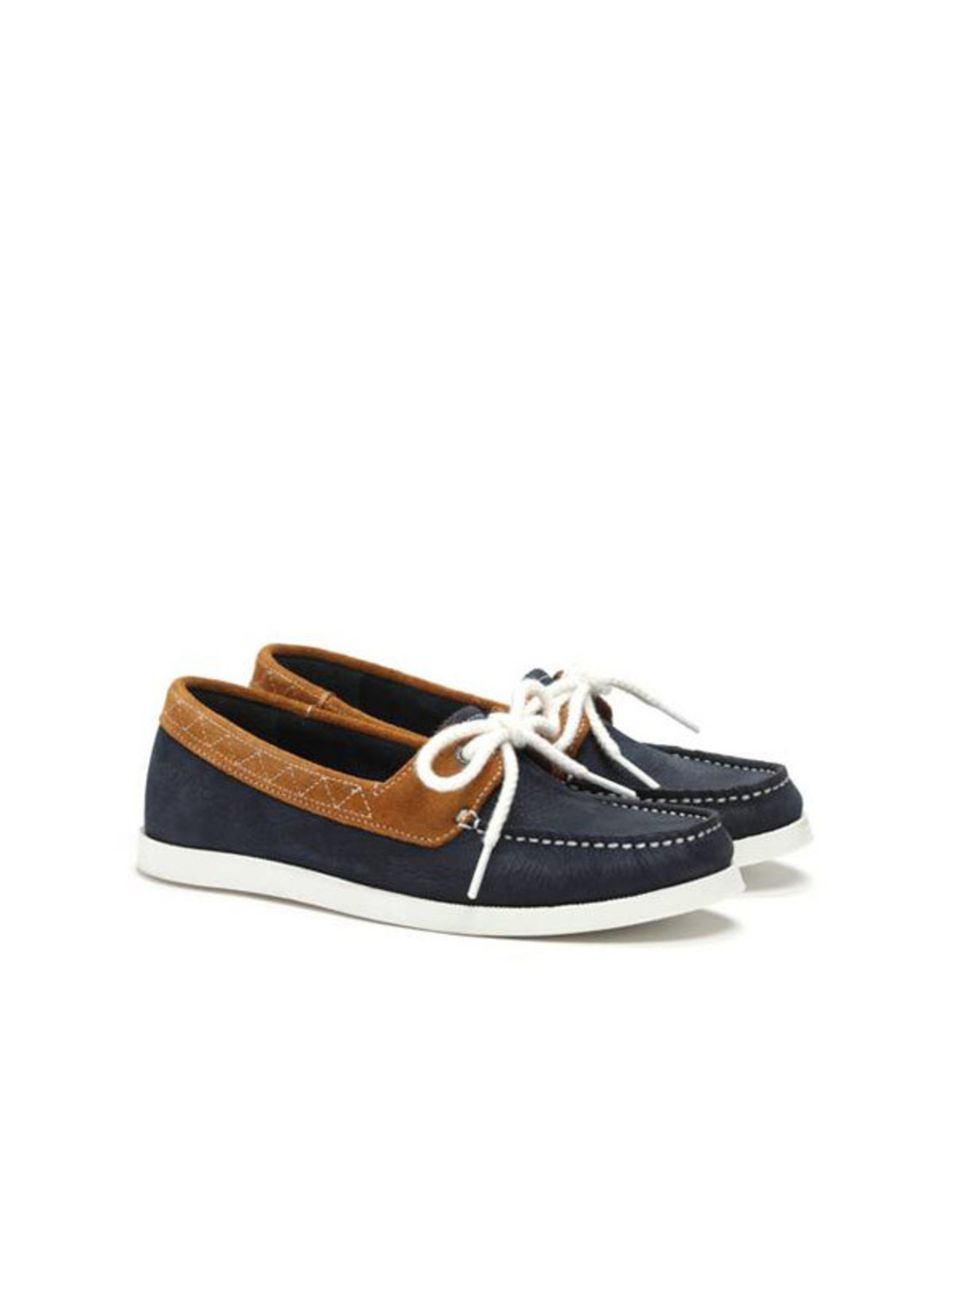 <p>Navy suede deck shoes, £95, by Pointer at <a href="http://www.elleuk.com/fashion/need-to-know/Dover-Street-Market">The Three Threads</a></p>